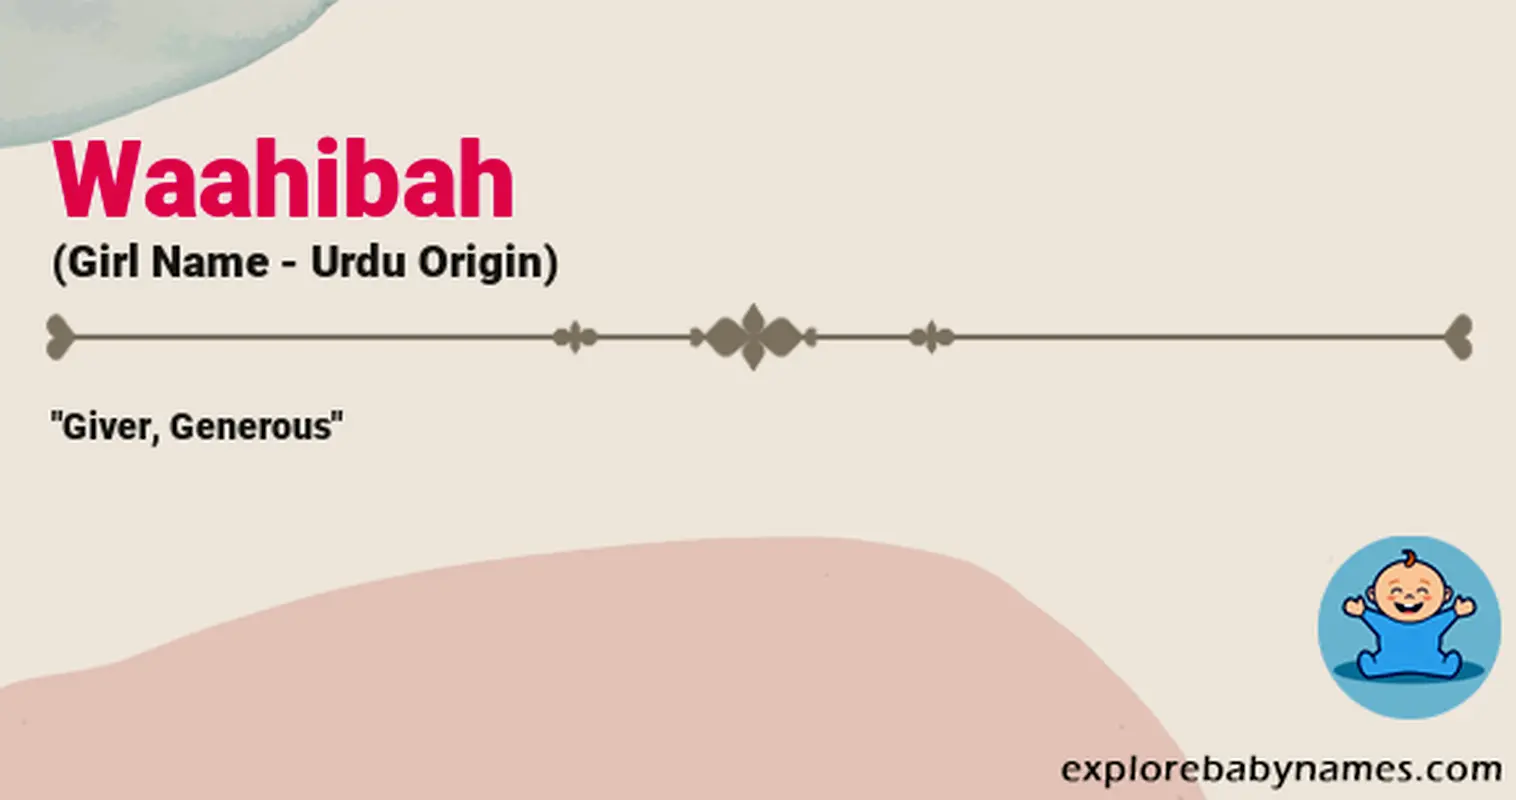 Meaning of Waahibah